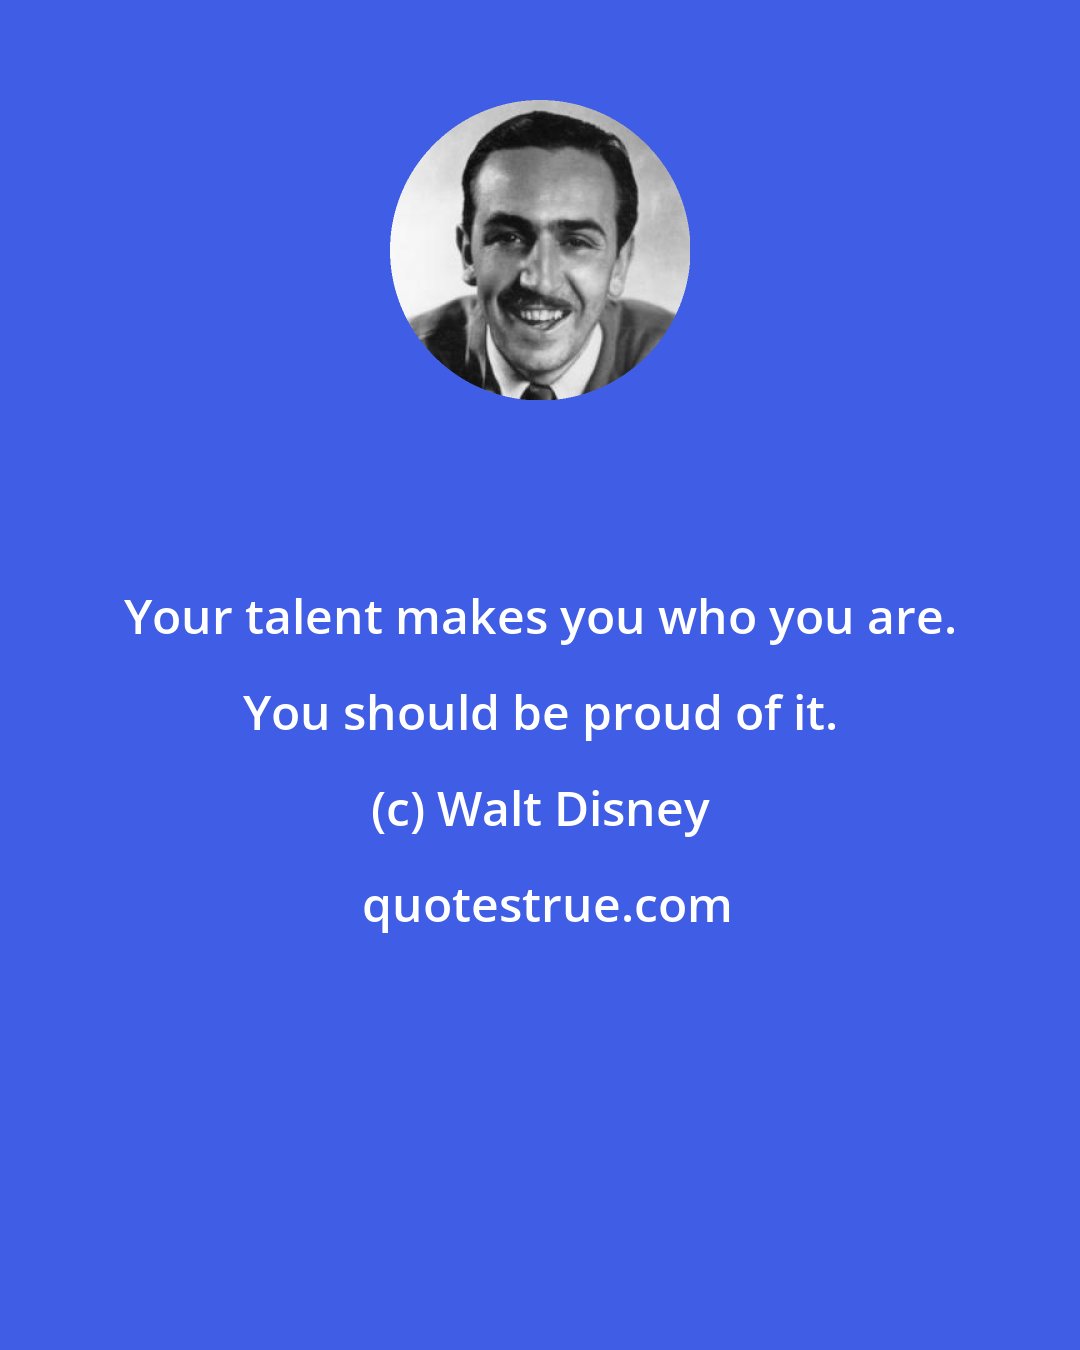 Walt Disney: Your talent makes you who you are. You should be proud of it.